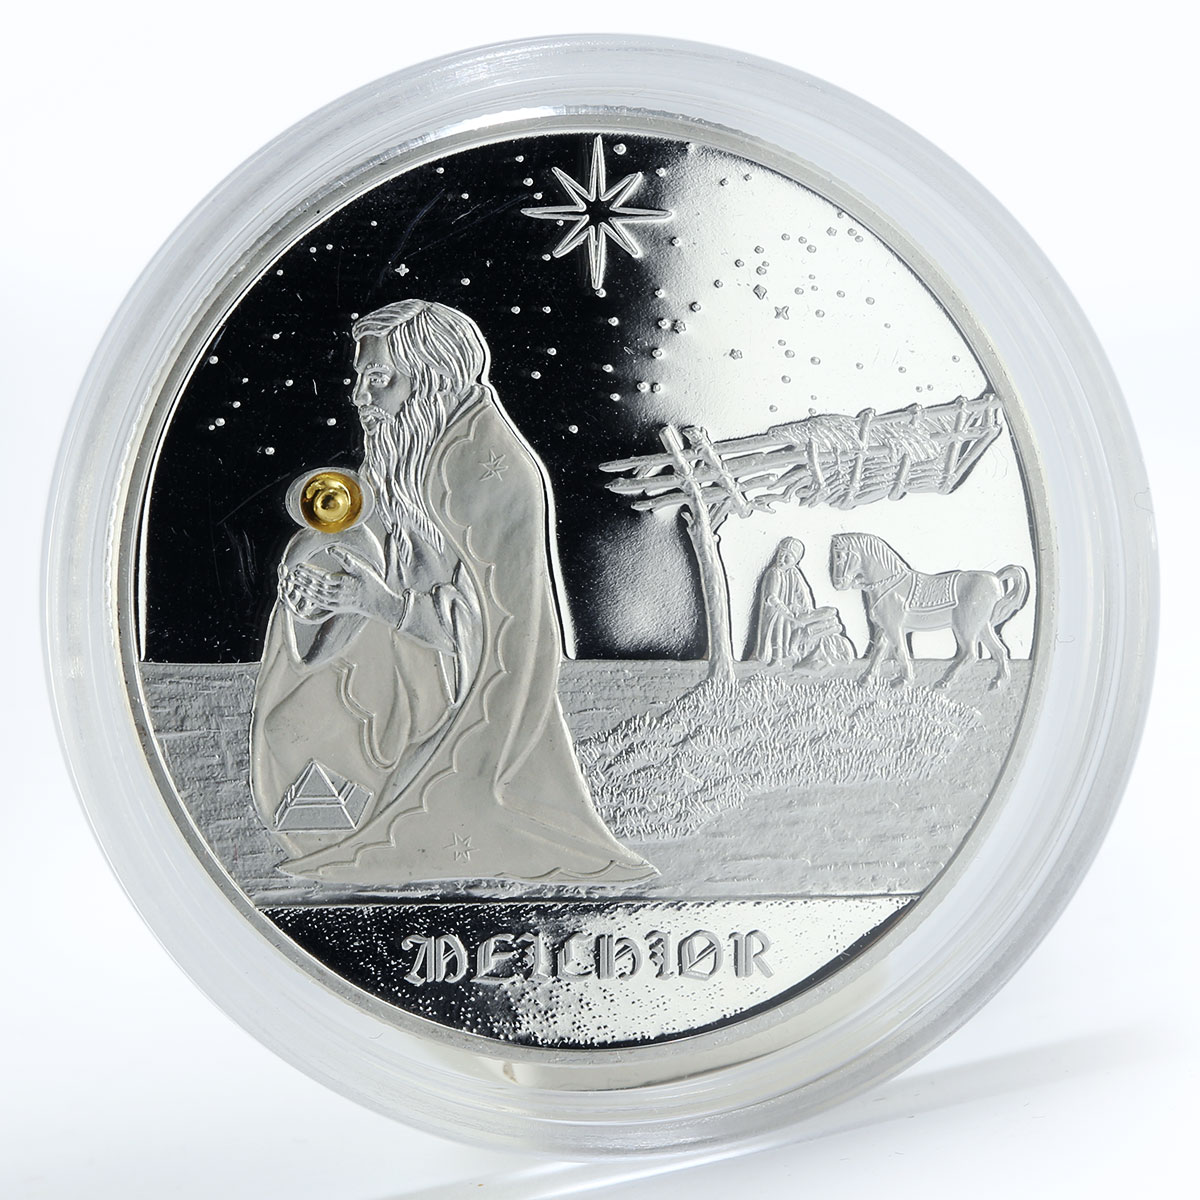 Congo 10 francs Melchior Star crystal proof silver coin 2005